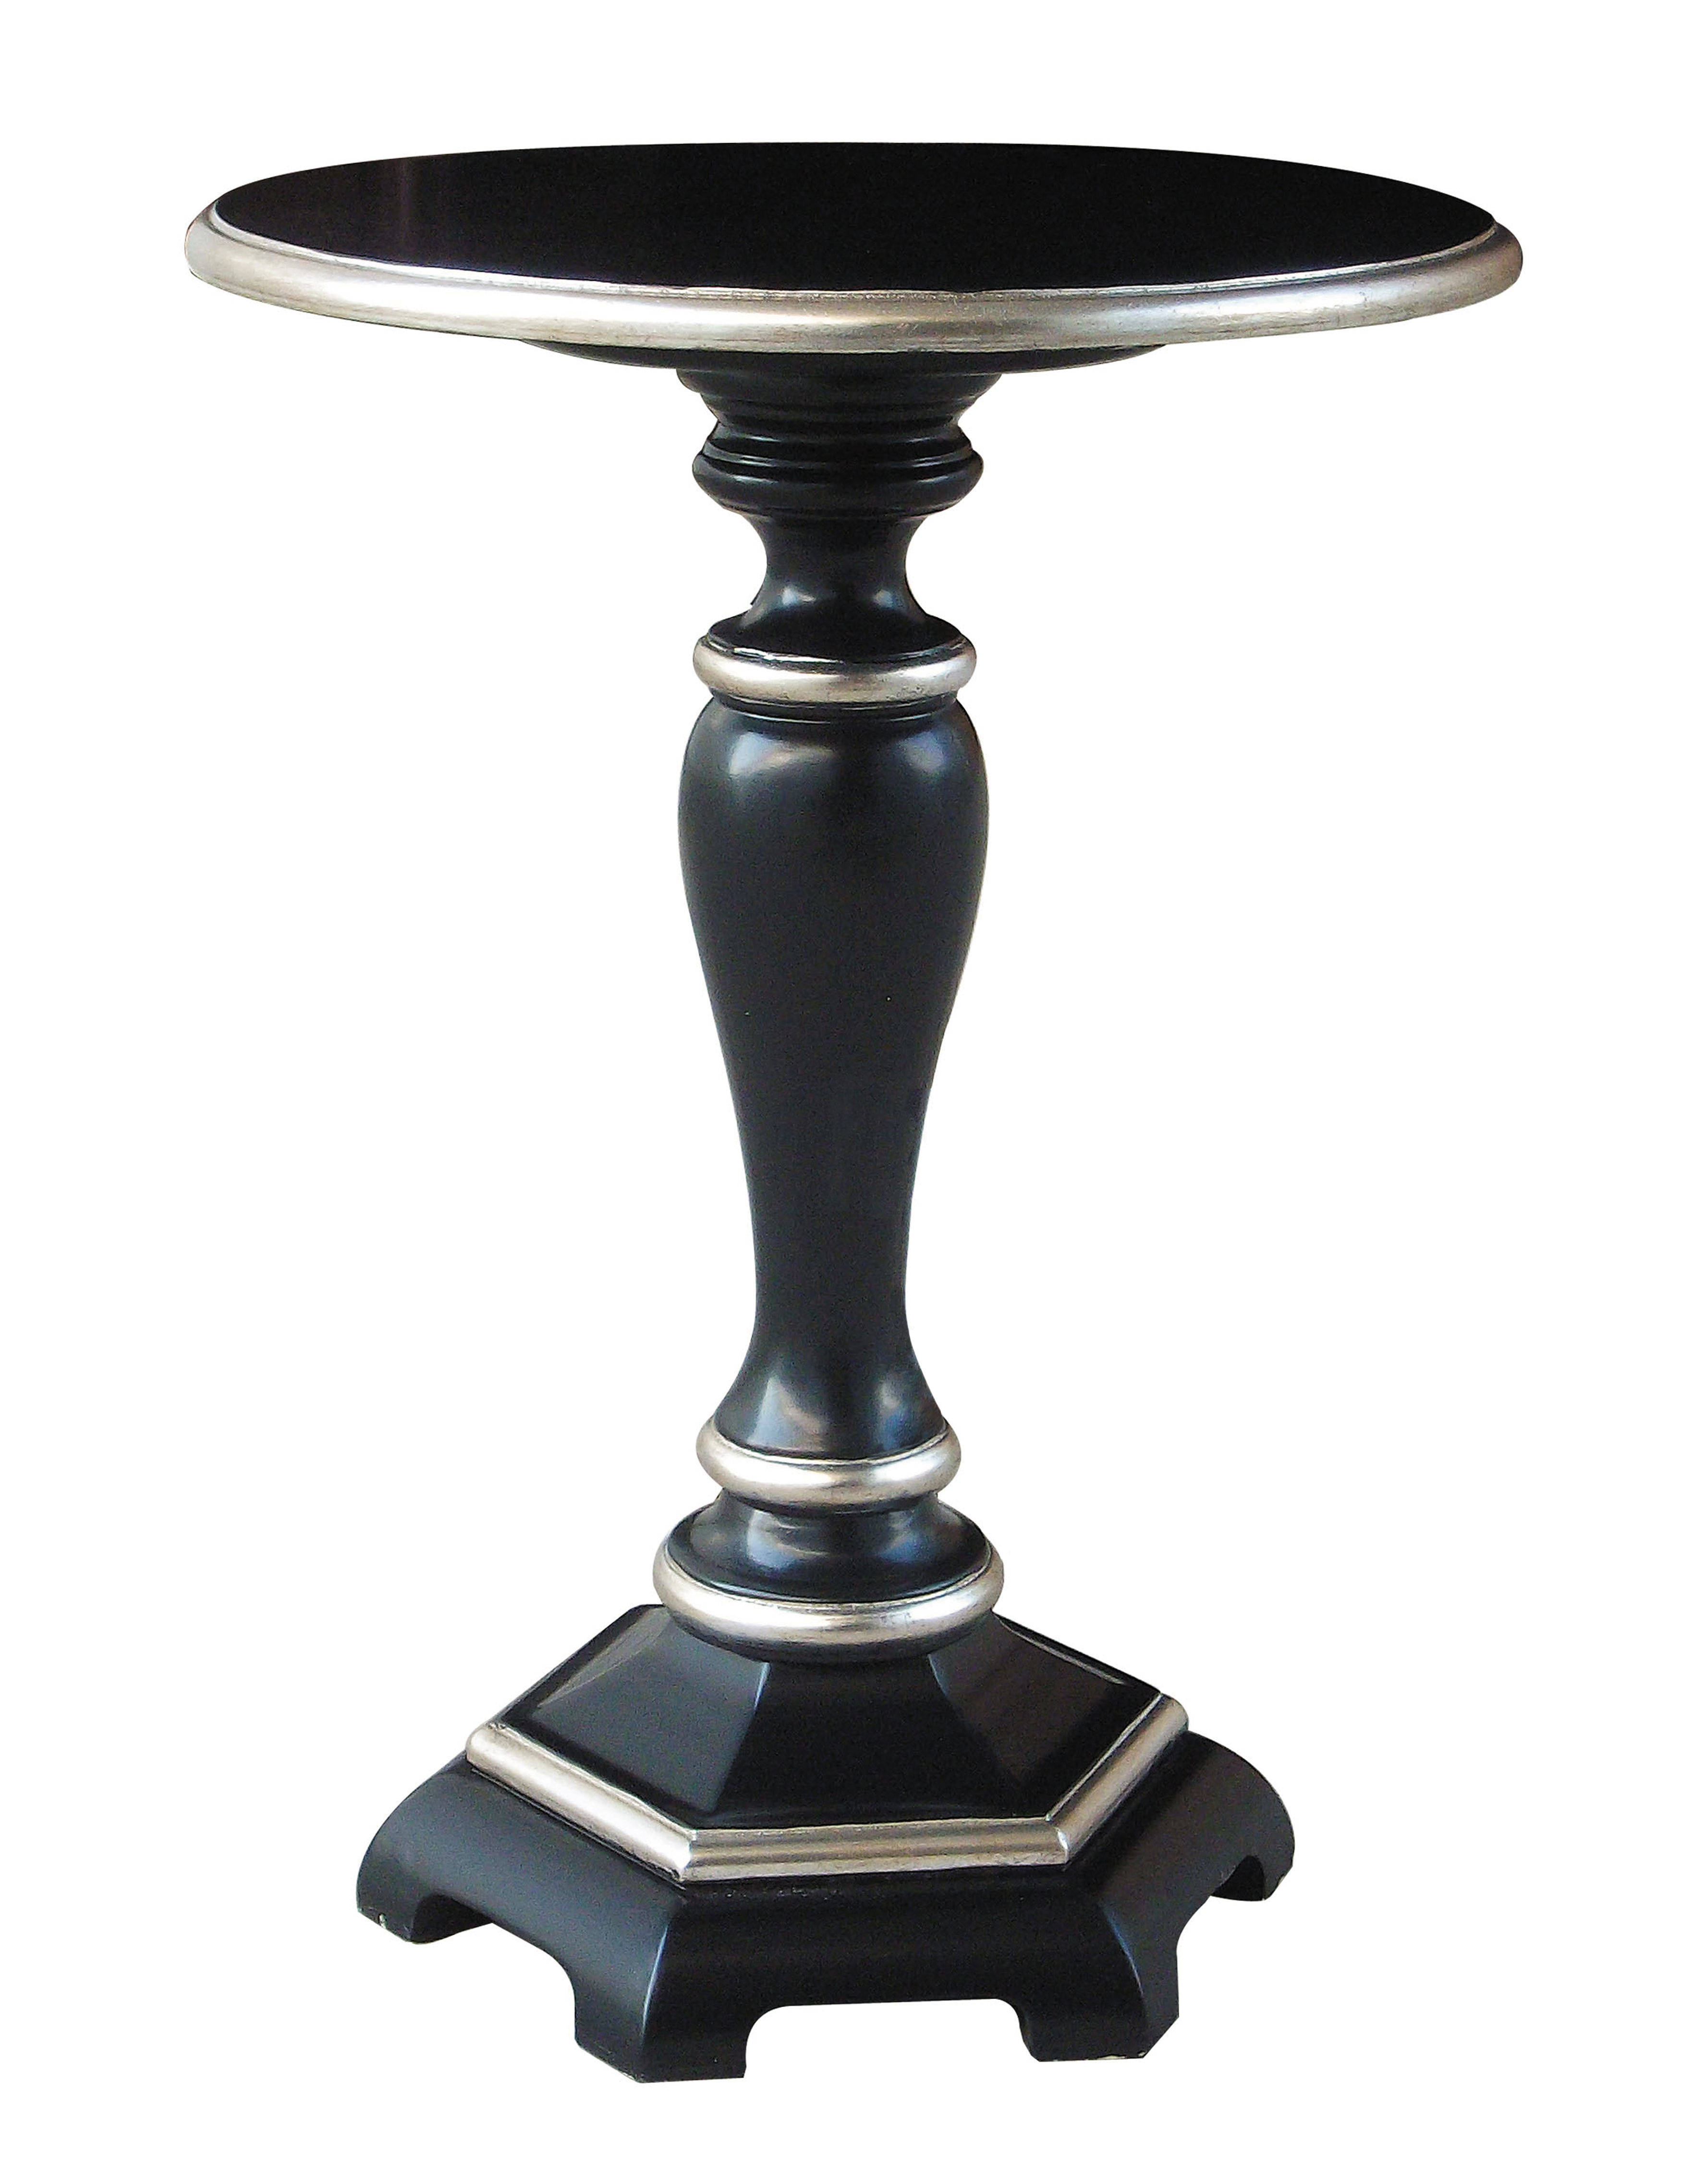 home meridian black pedestal accent table the classy scc threshold brown umbrellas that provide shade white wood small teak outdoor end inch vintage ethan allen coffee large